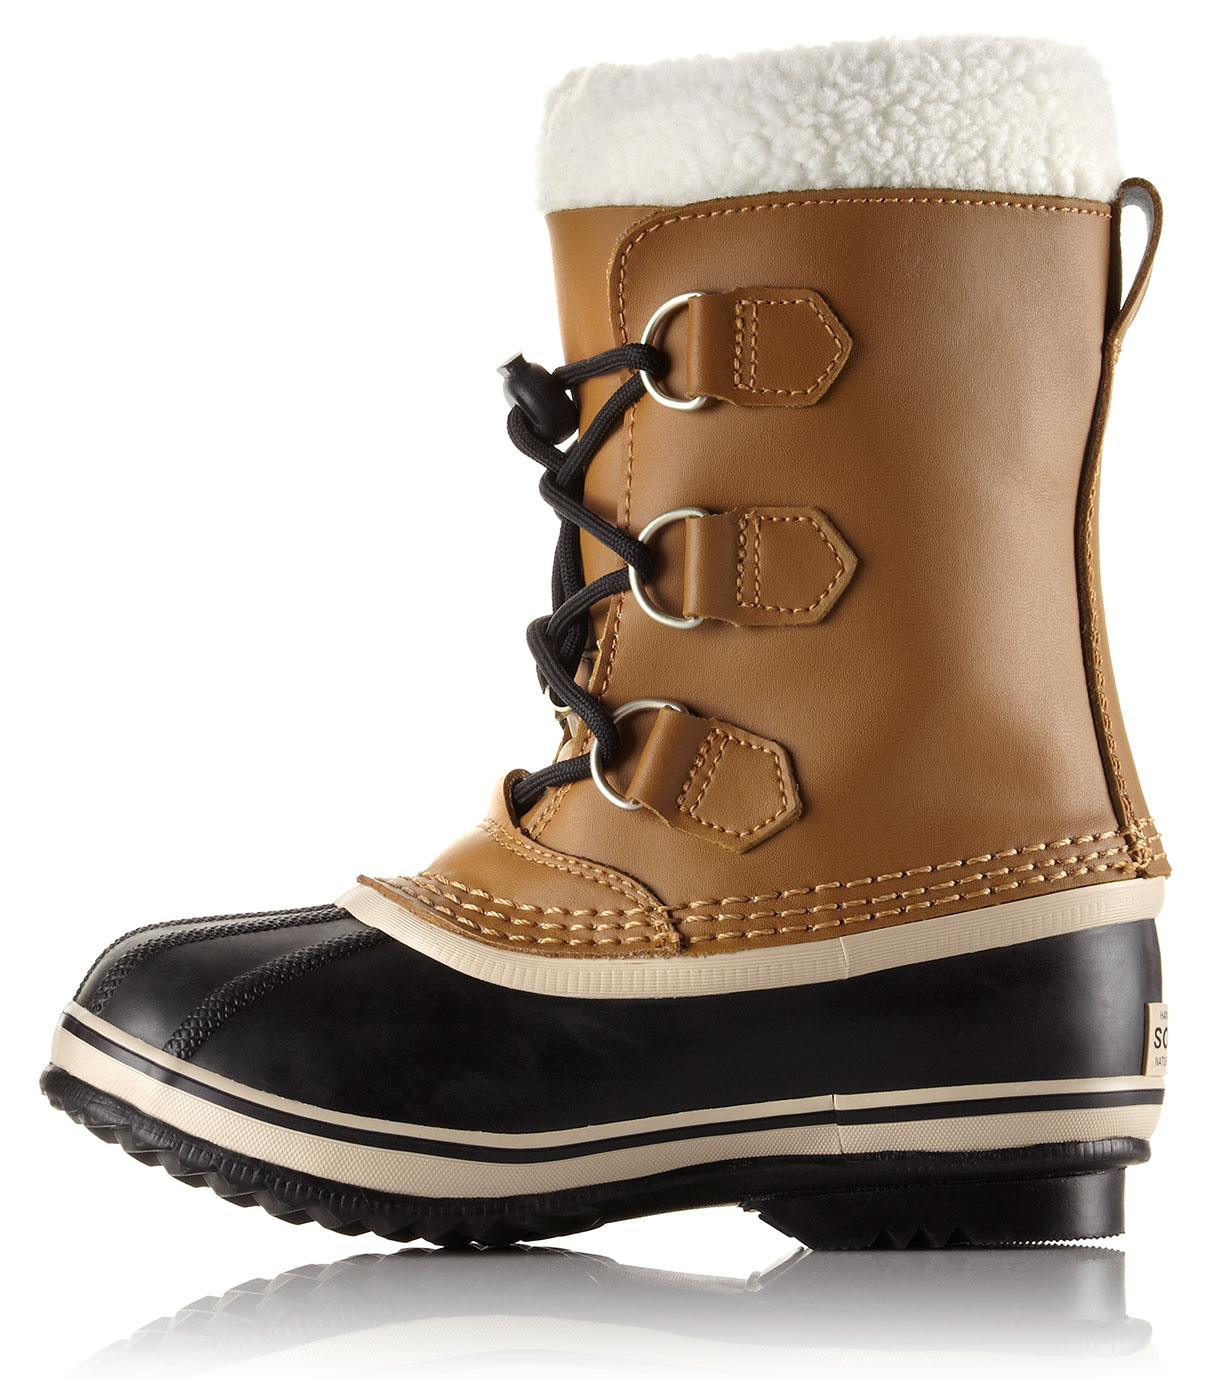 Sorel Yoot Pac TP Childrens Leather Waterproof Winter Boots